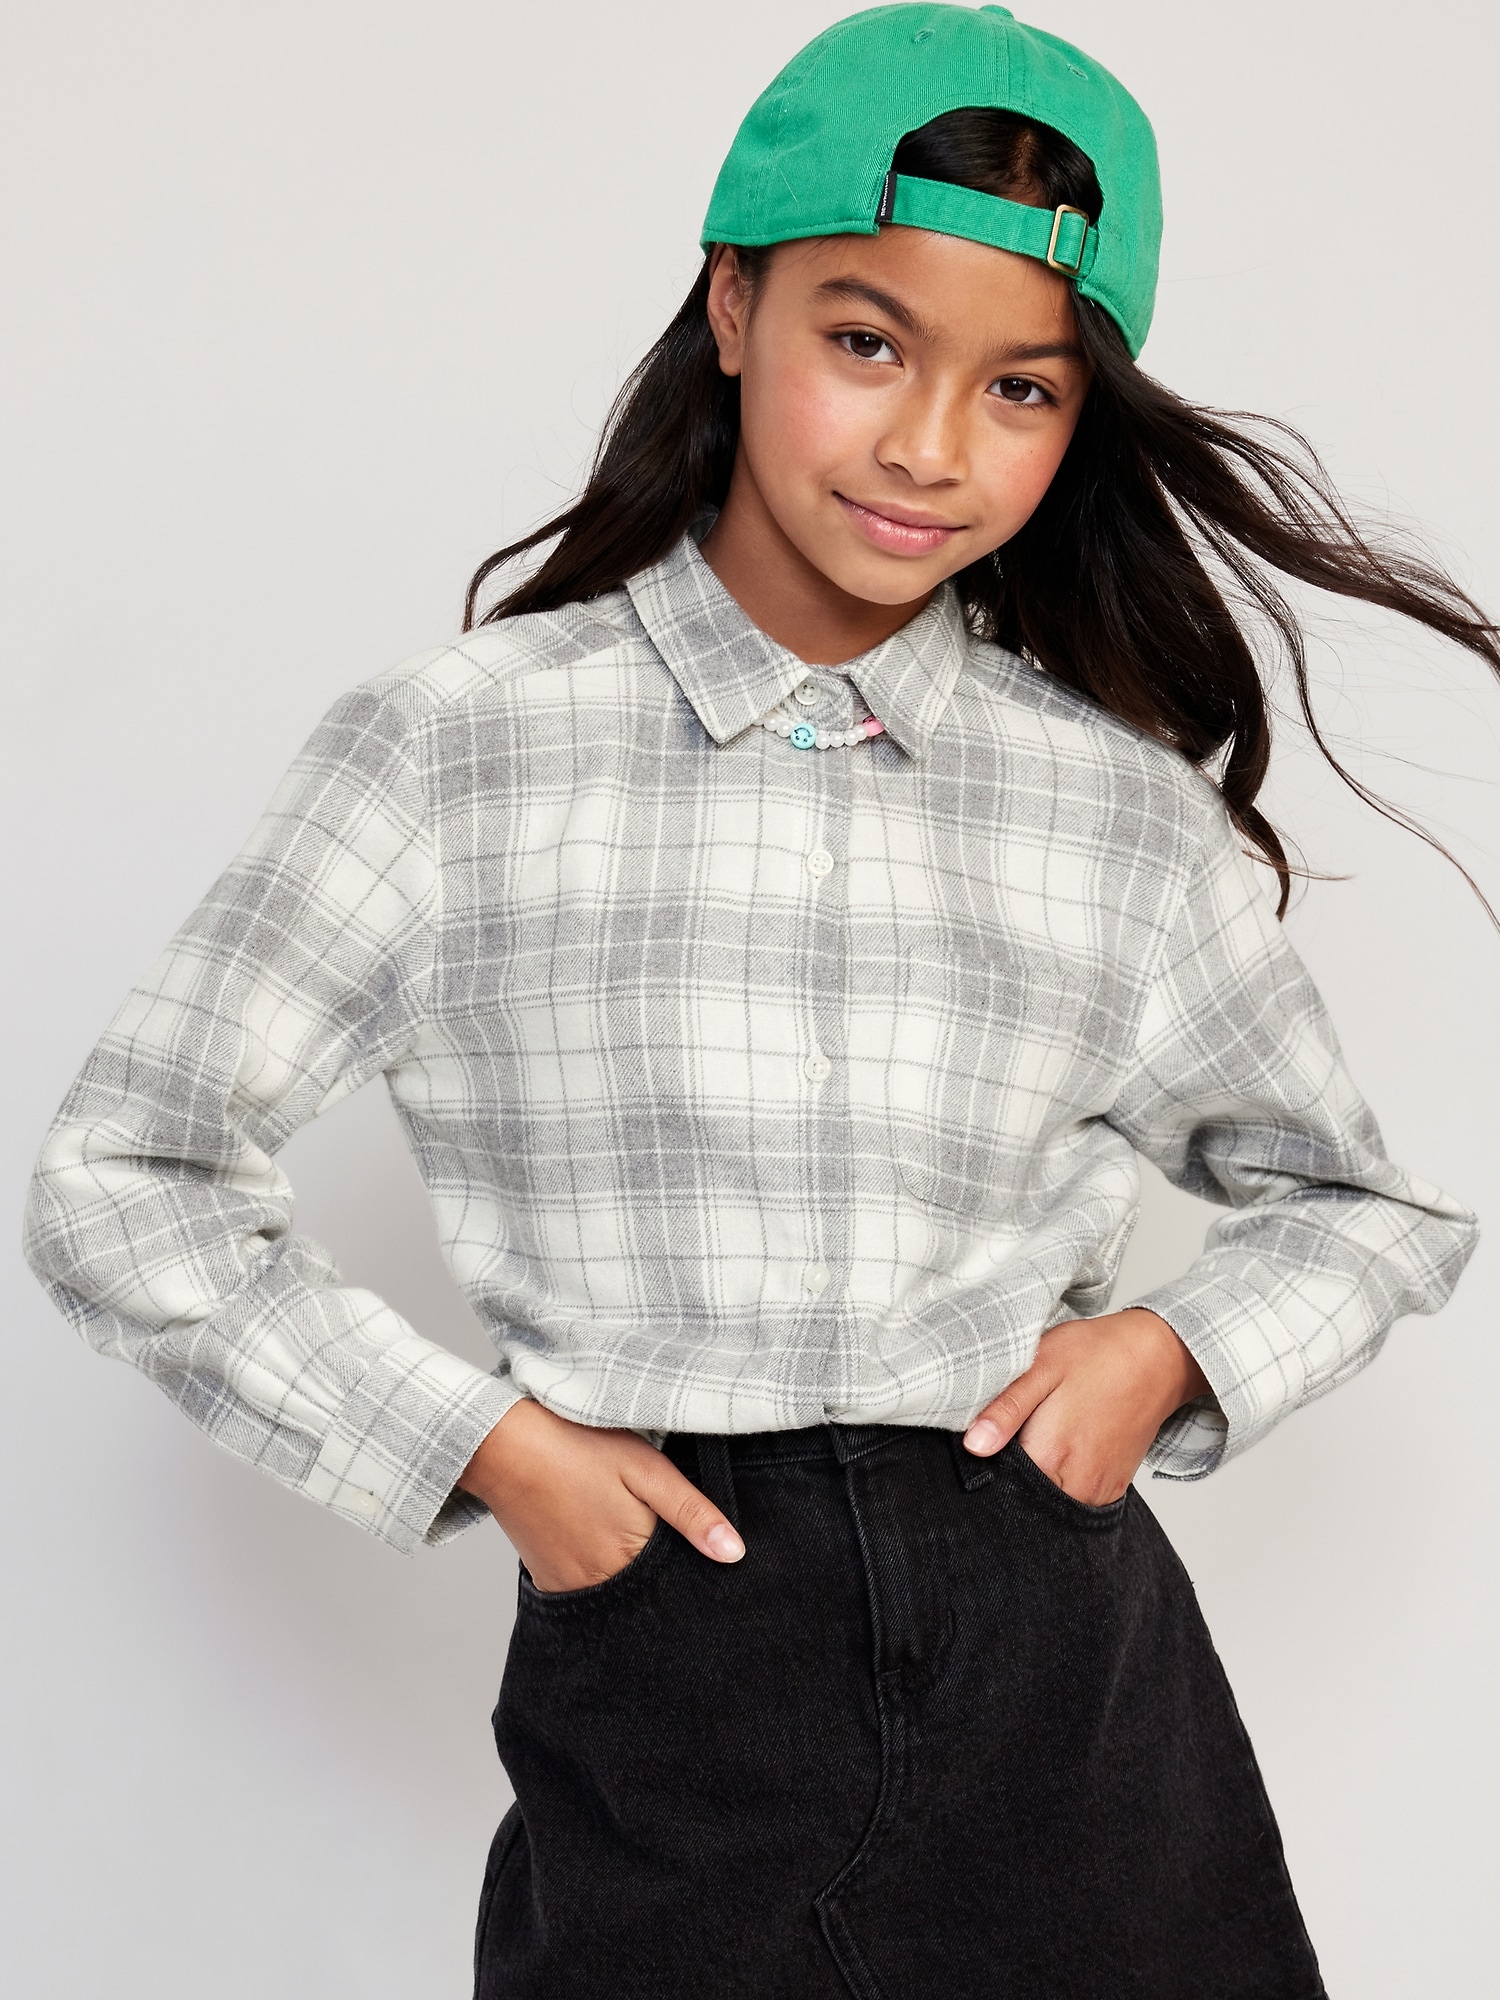 Miusey Plaid Tunic Shirts for Women,Juniors Patchwork Checked